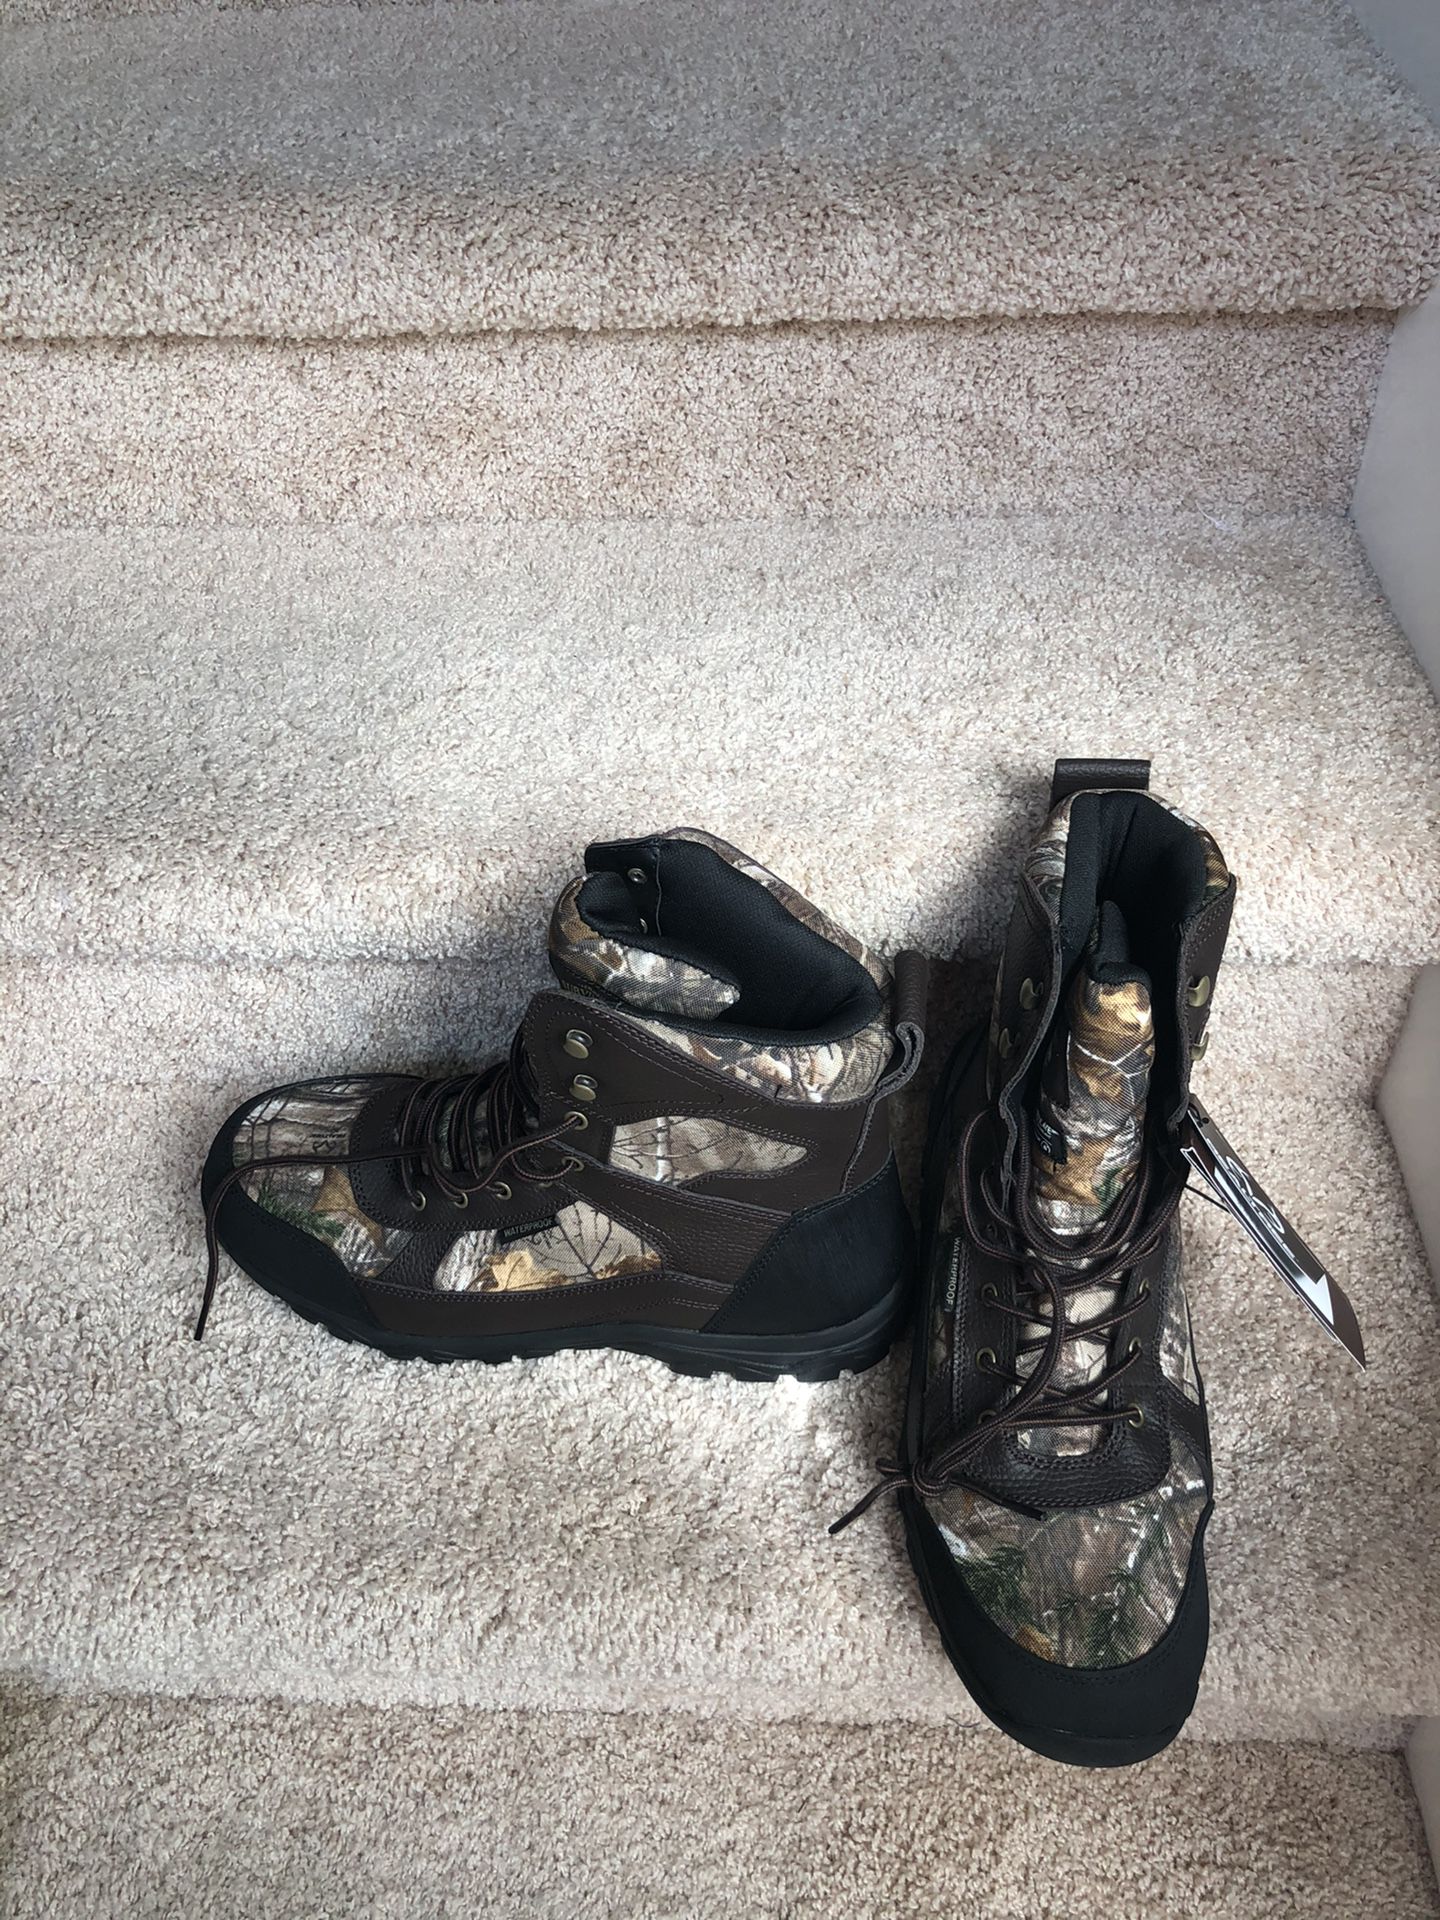 New camo boots weather proof slip resistant water resistant size 13 and 14 available obo